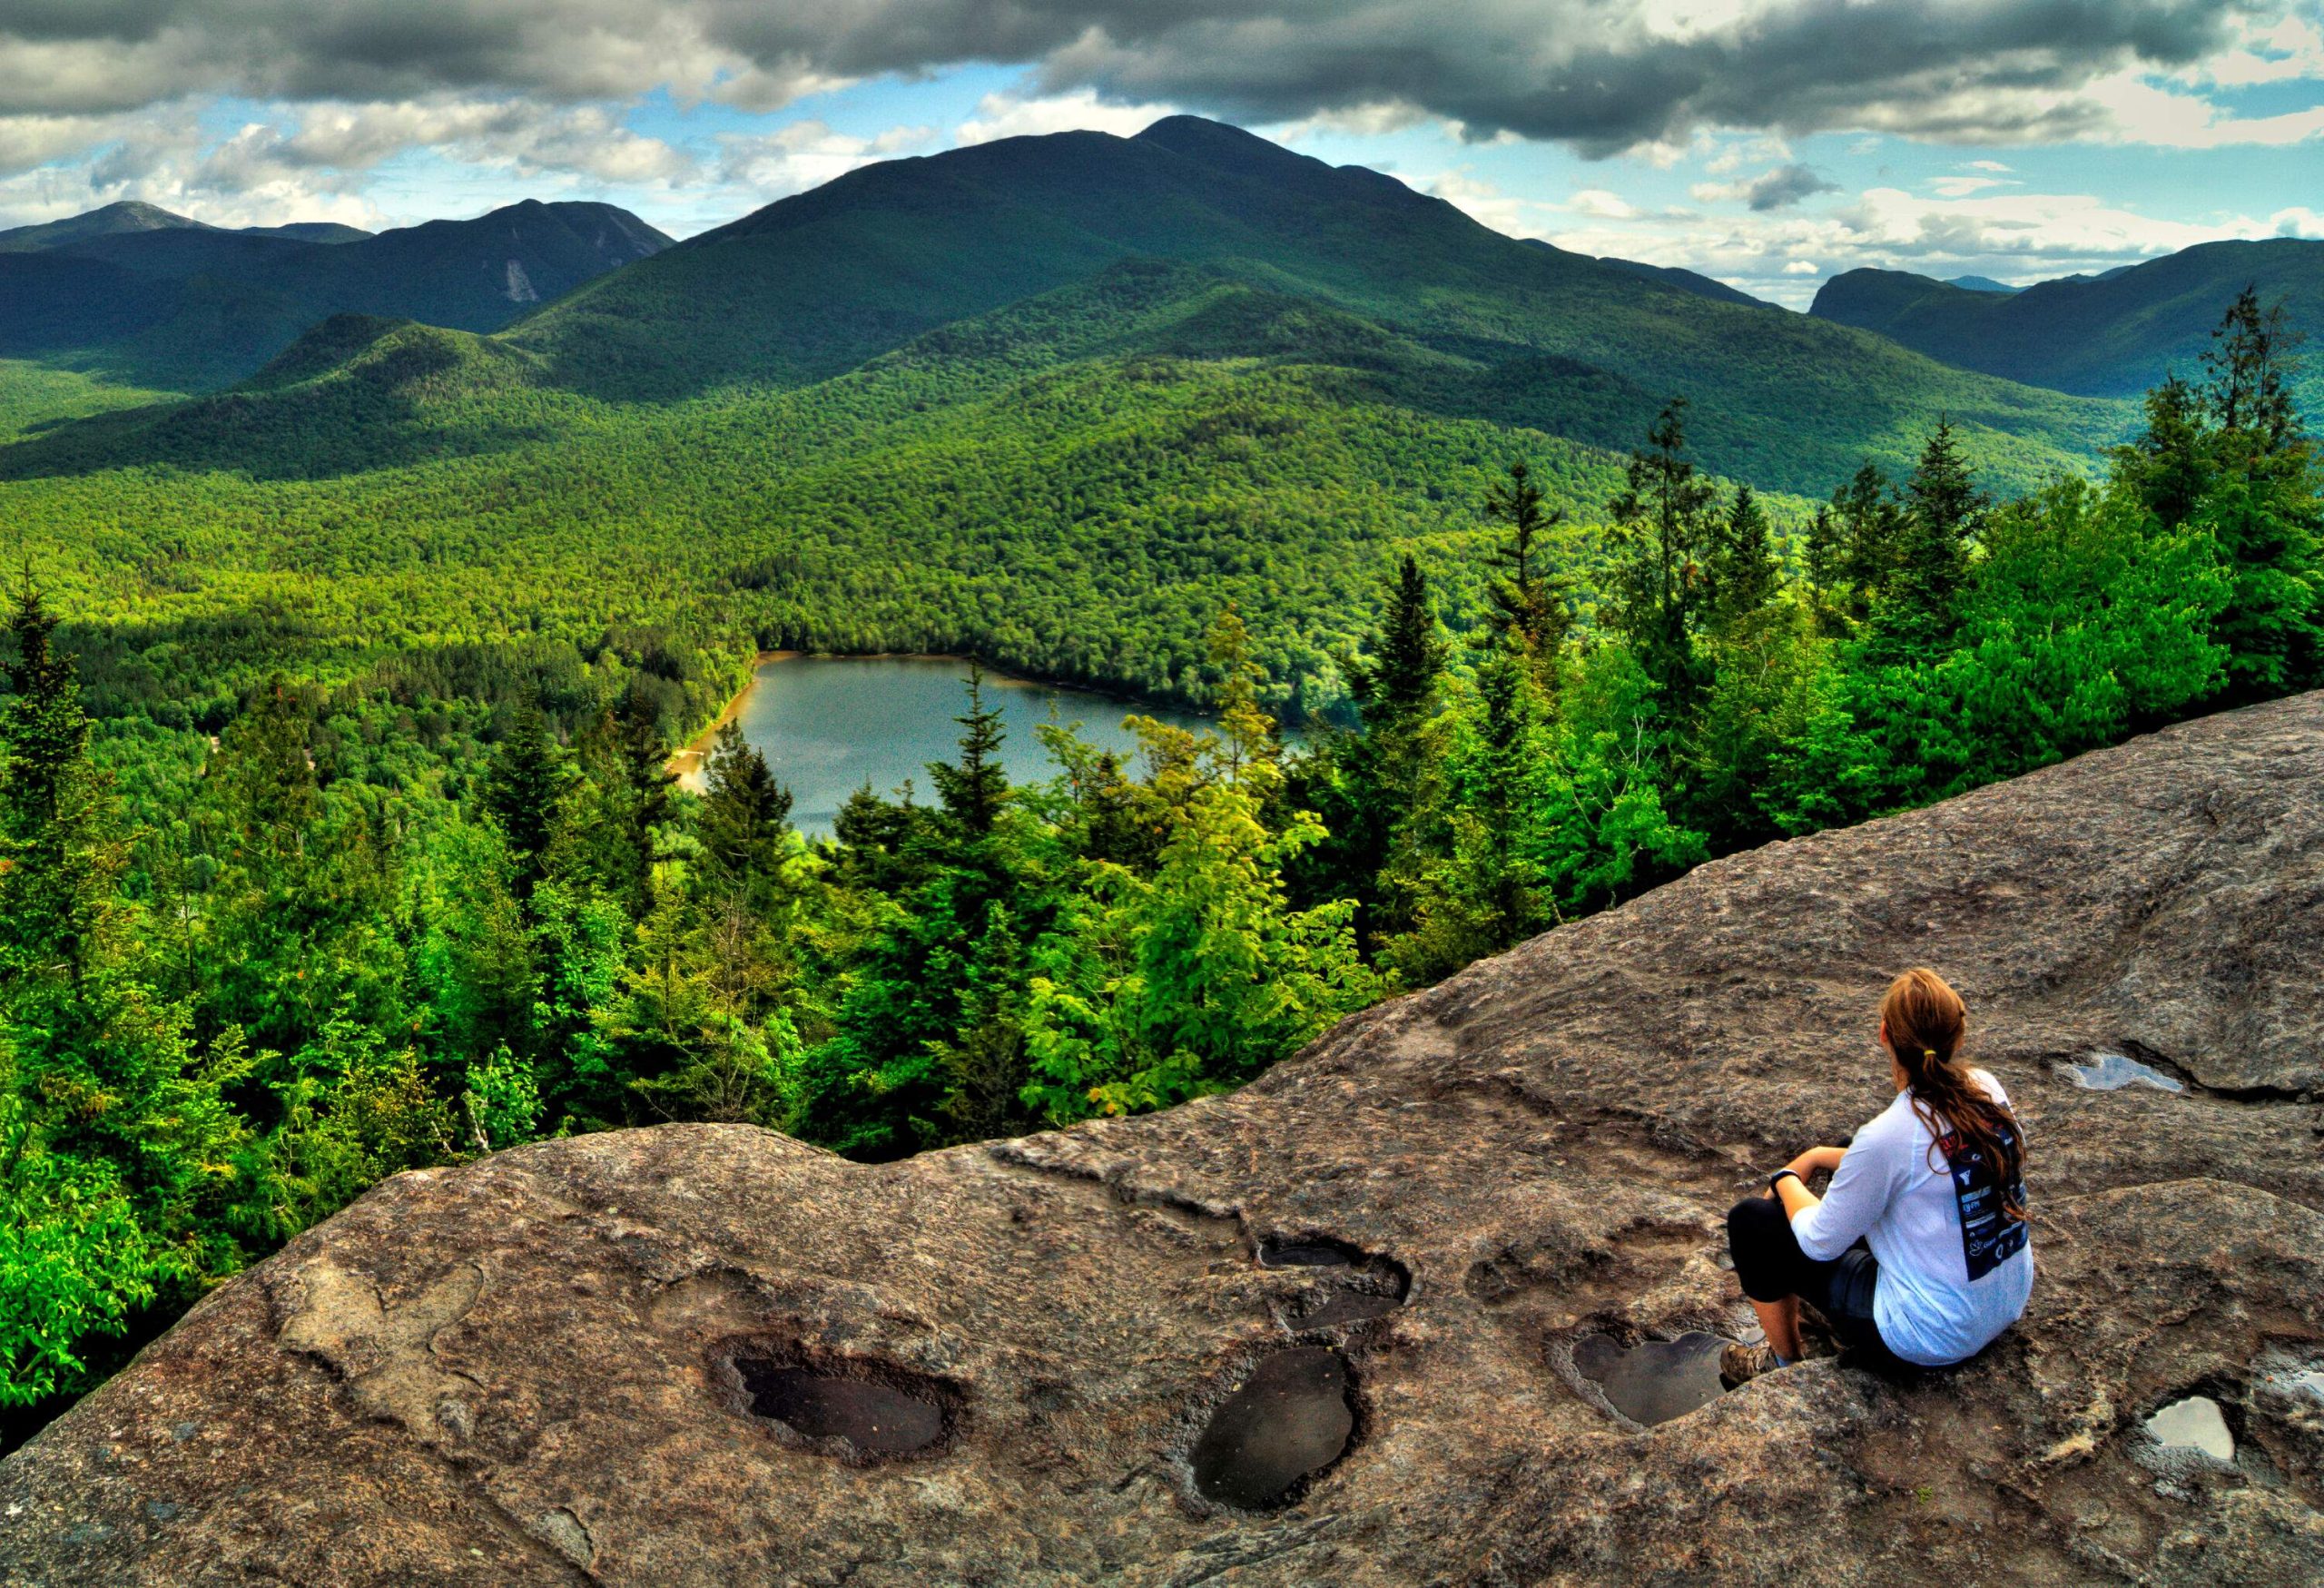 A person sits on a cliff overlooking the glorious verdant forested hills and a lake in the centre.